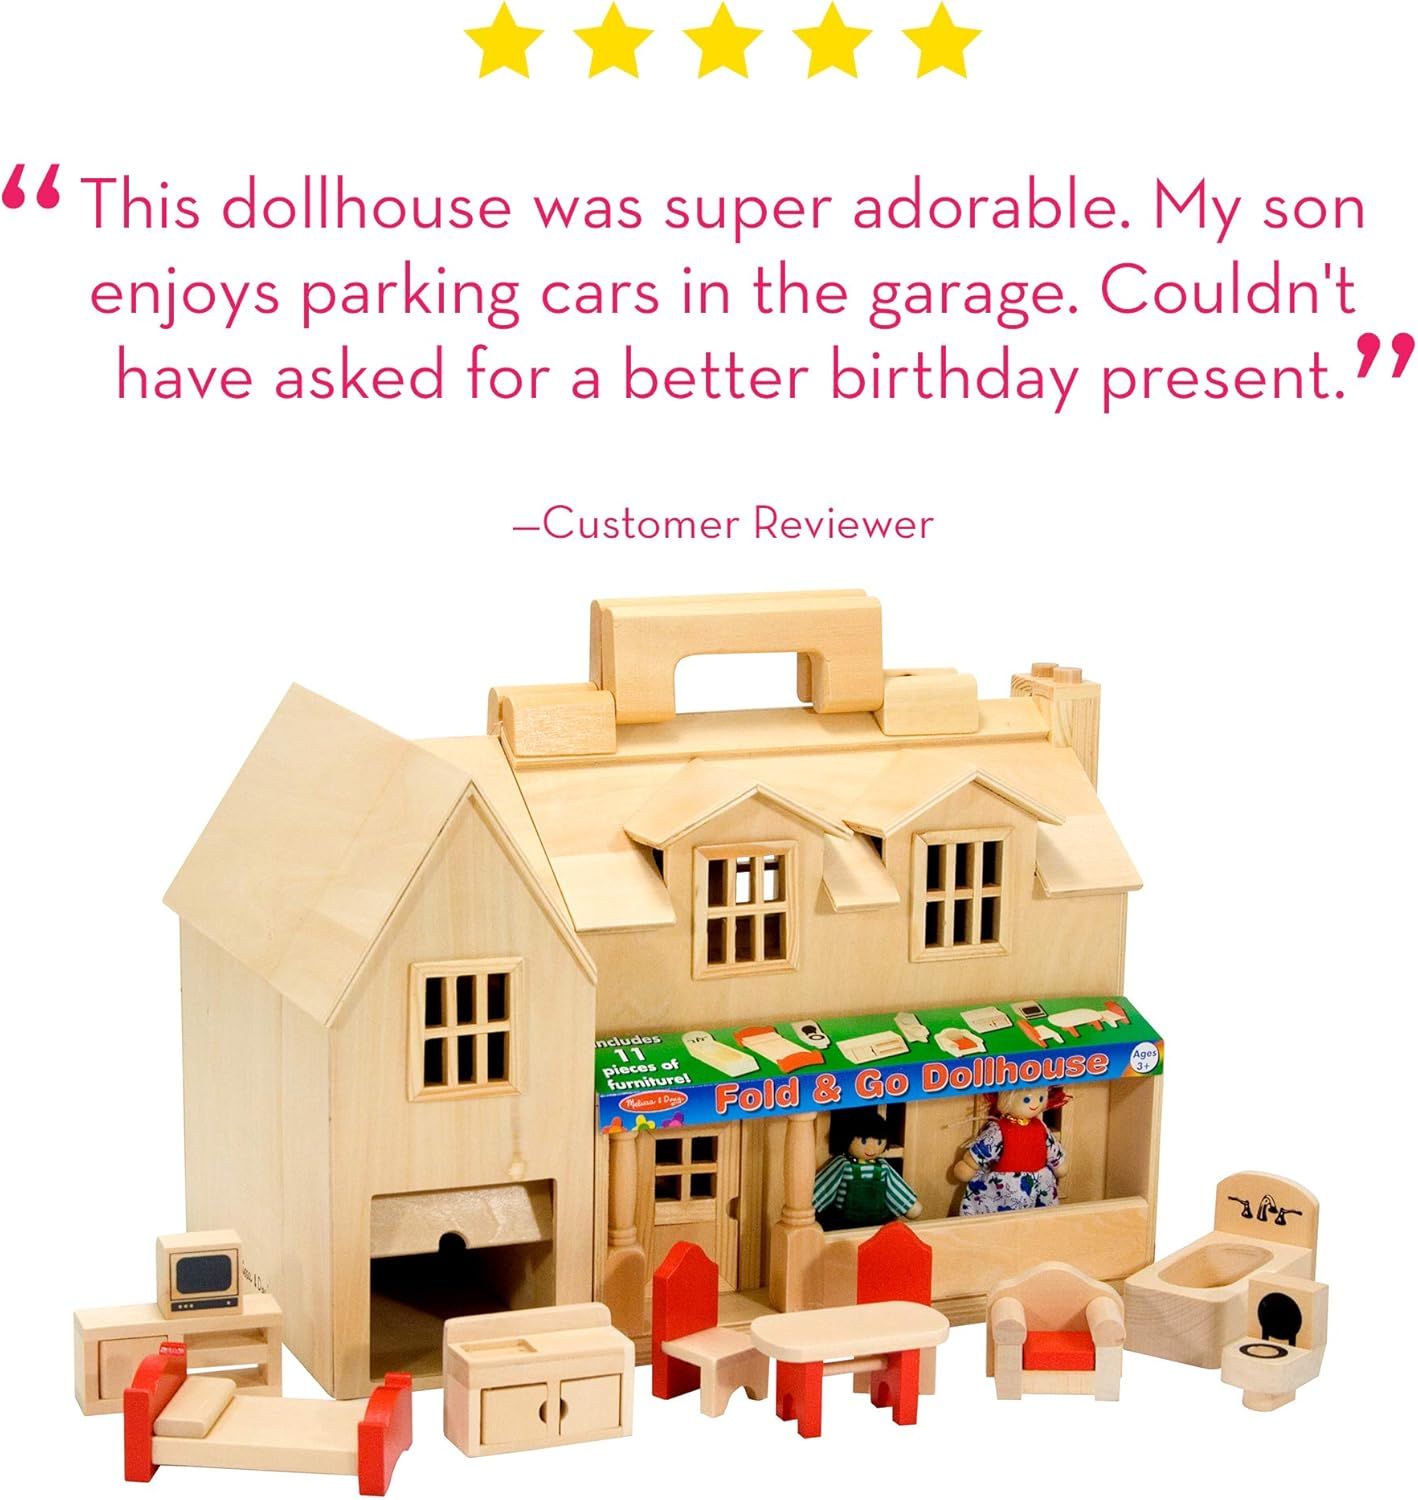 Melissa & Doug Fold & Go Wooden Dollhouse With 2 Play Figures and 11 Pieces of Furniture | Amazon (US)